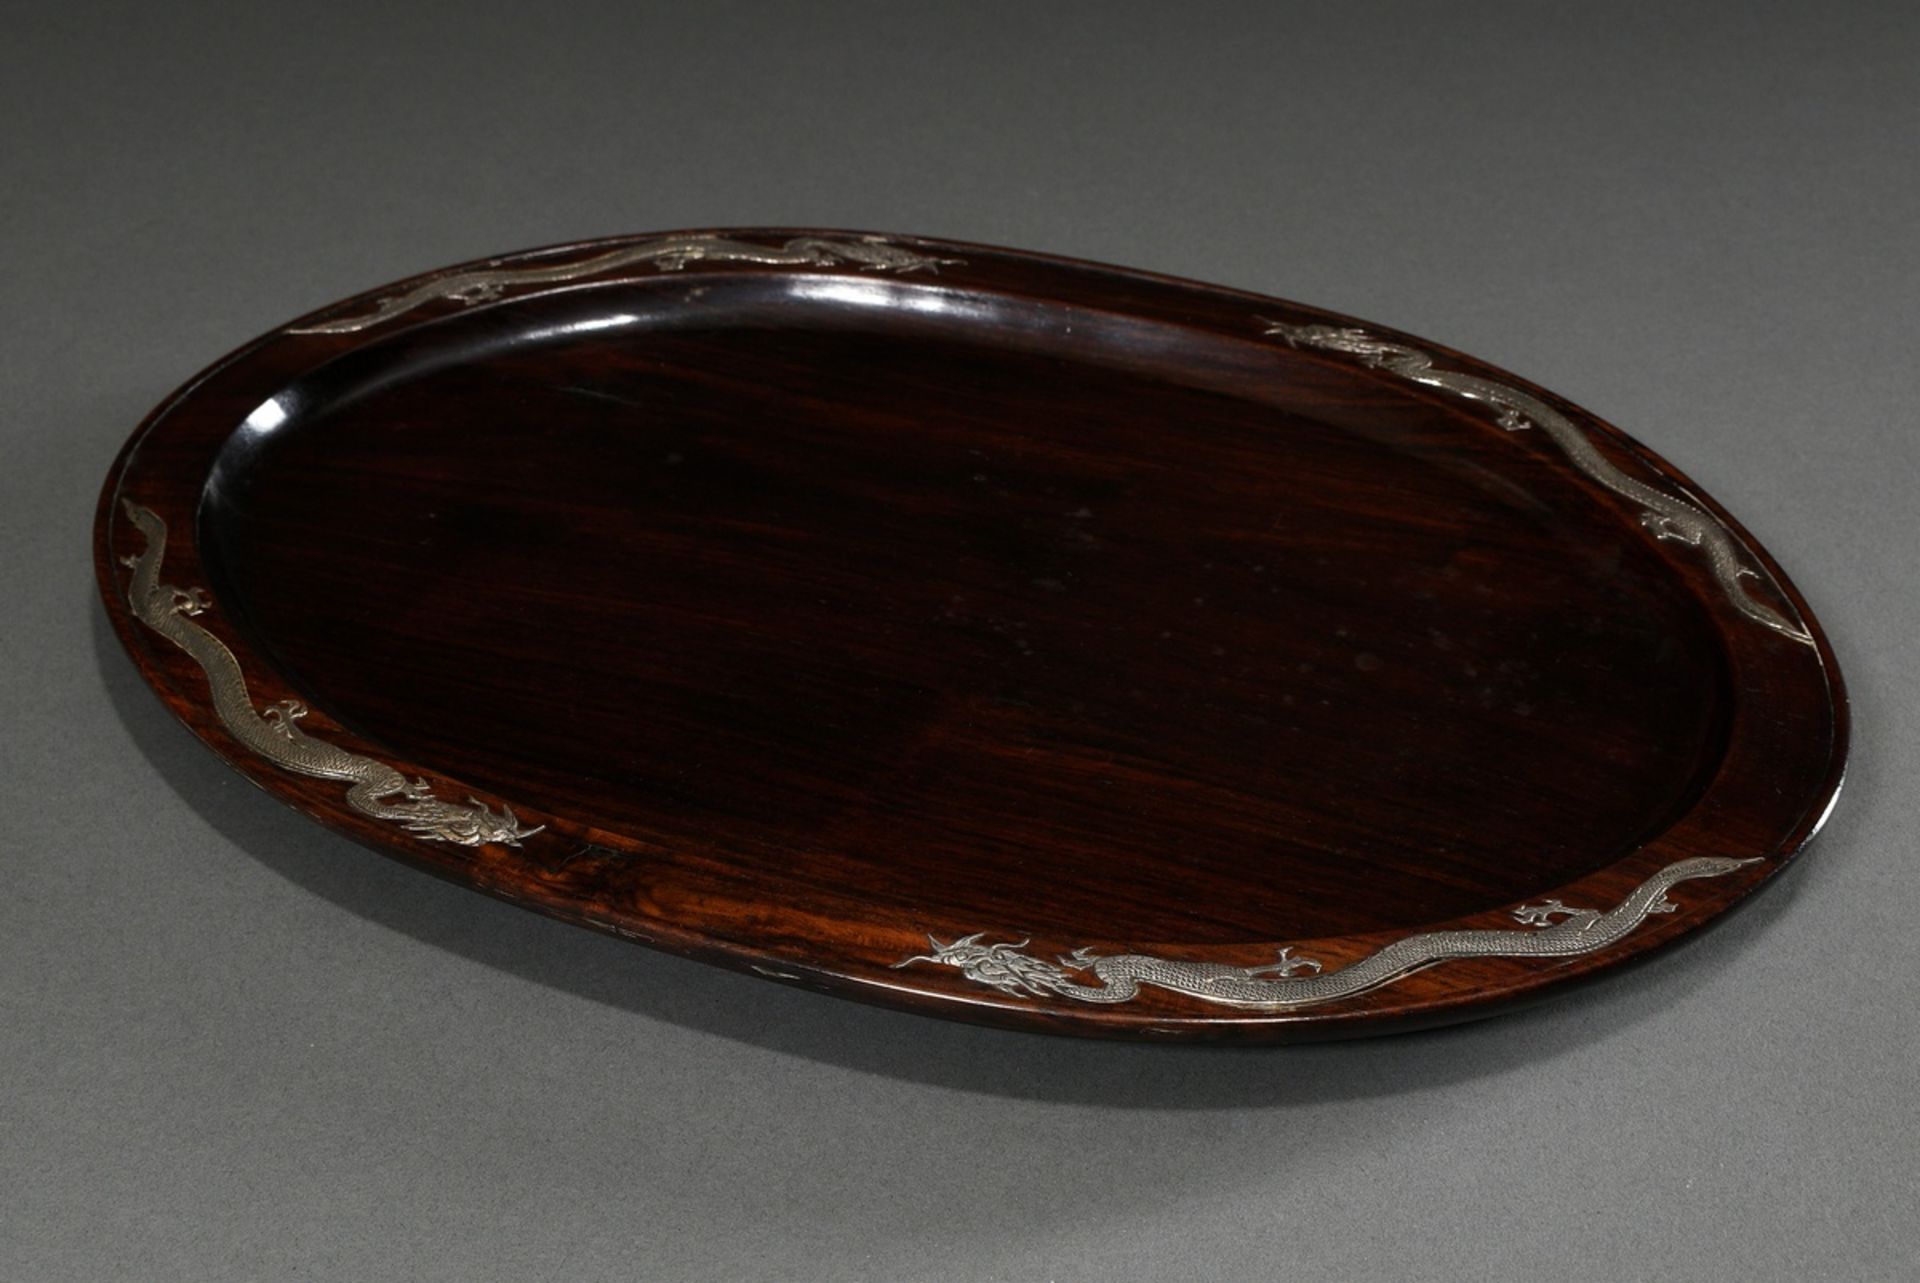 Oval blackwood tray with four silver relief decorations "dragons" on the rim, China circa 1900/1920 - Image 2 of 5